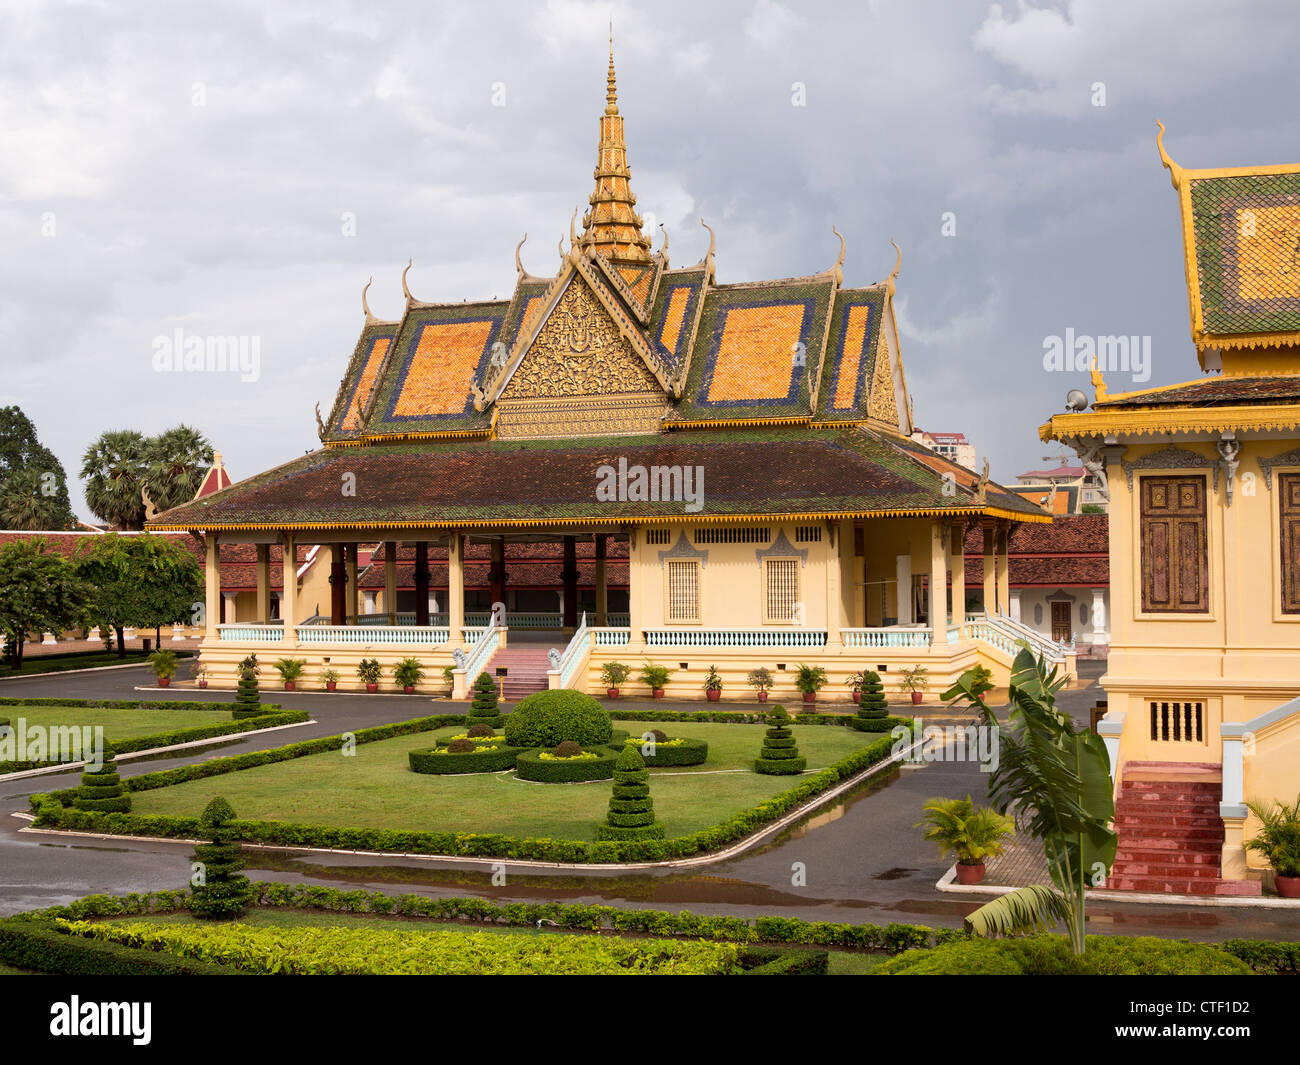 Moonlight Pavilion in the Royal Palace in Phnom Penh, Cambodia Stock Photo